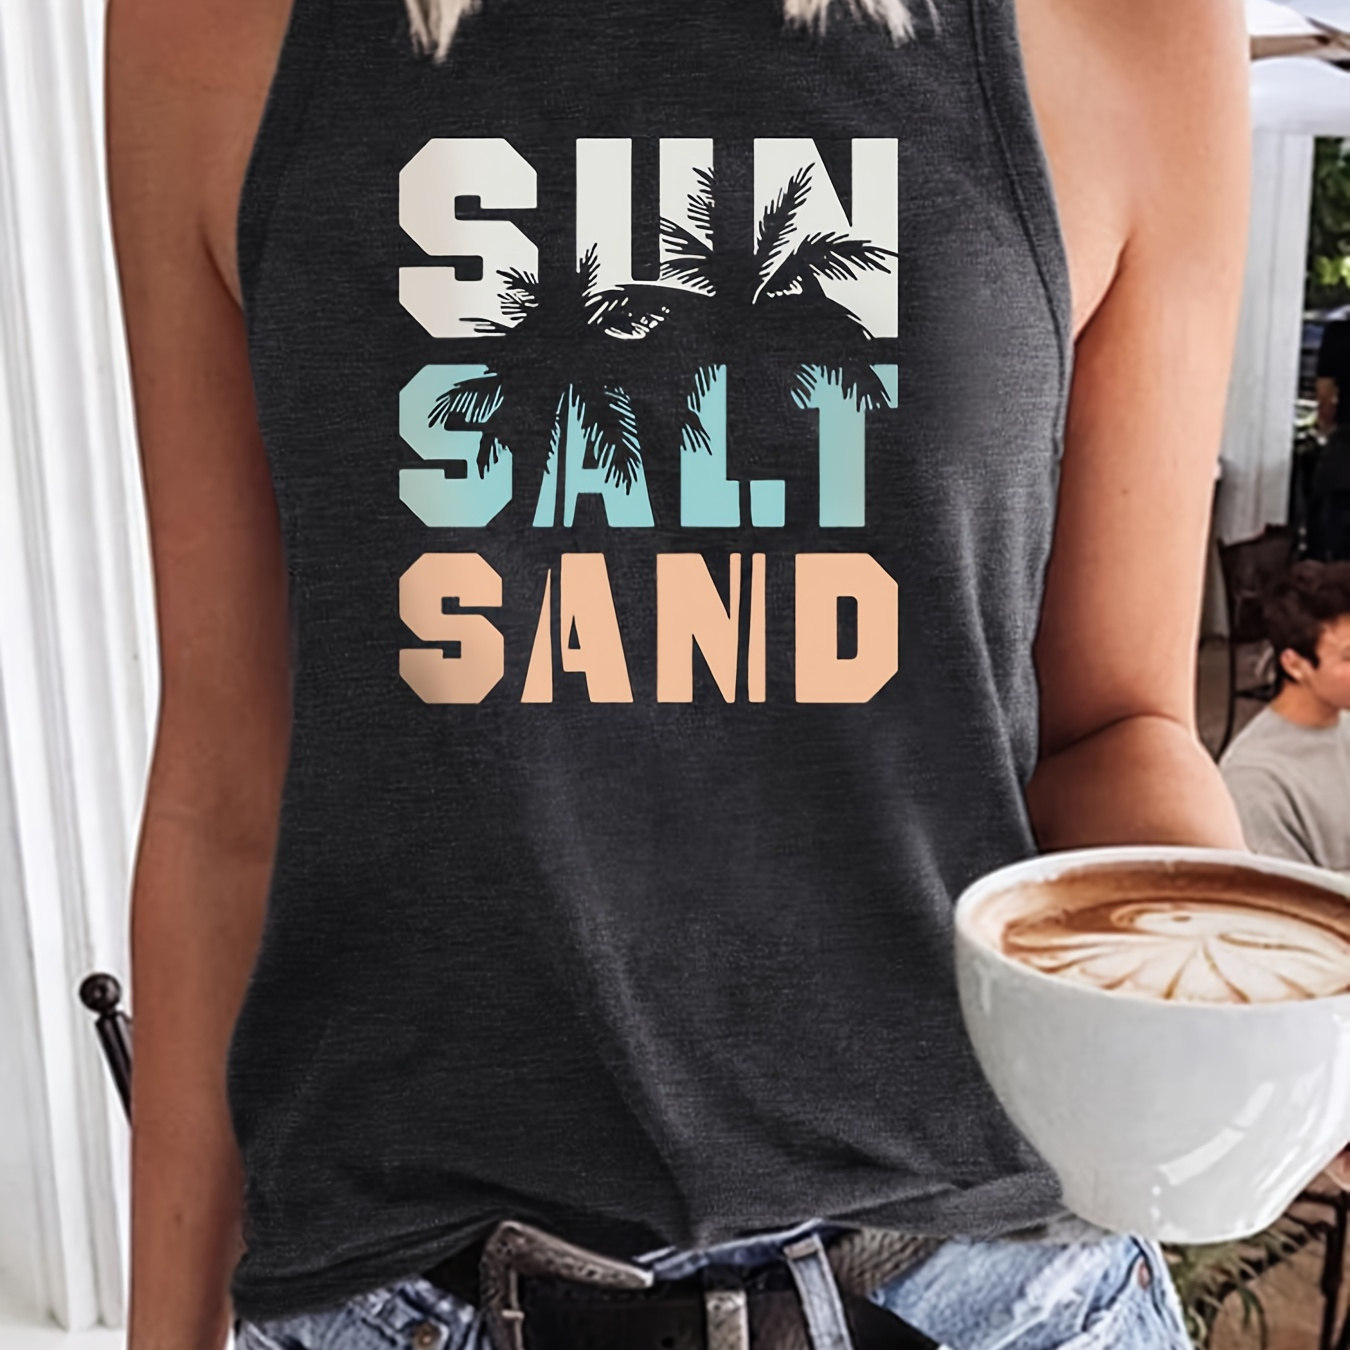 

Letter Print Crew Neck Tank Top, Casual Fashion Sleeveless Loose Tank Top, Women's Clothing